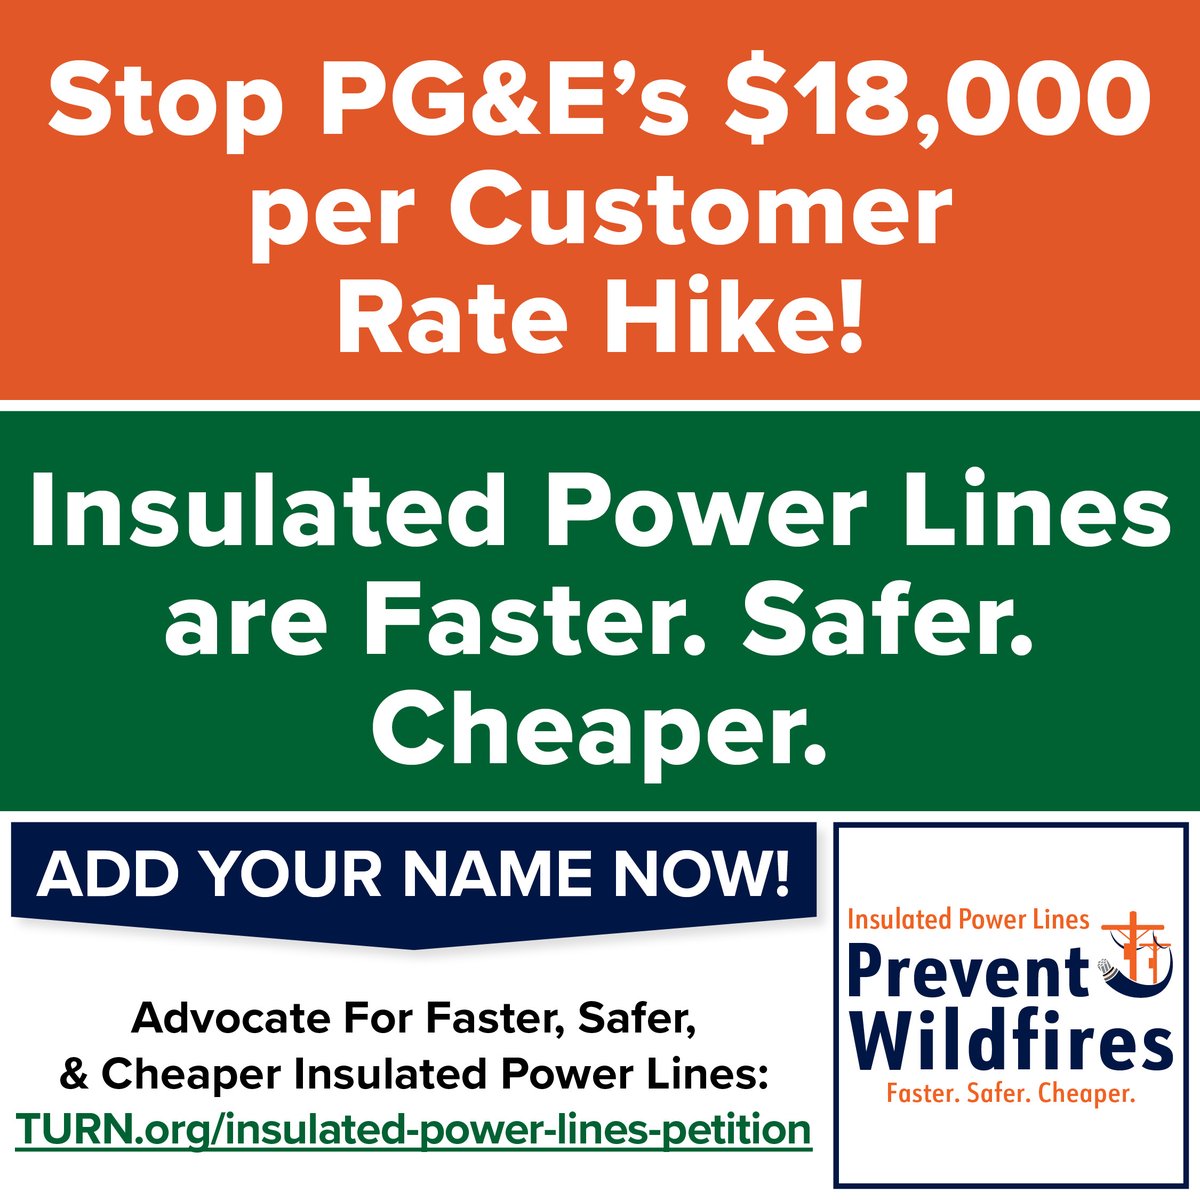 Let’s prevent lining the pockets of Wall Street and costing PG&E customers millions of dollars on top of skyrocketing energy costs. Sign the petition today: TURN.org/insulated-powe…

#turn #pacificgasandelectric #preventwildfires #utilities #fastersafercheaper